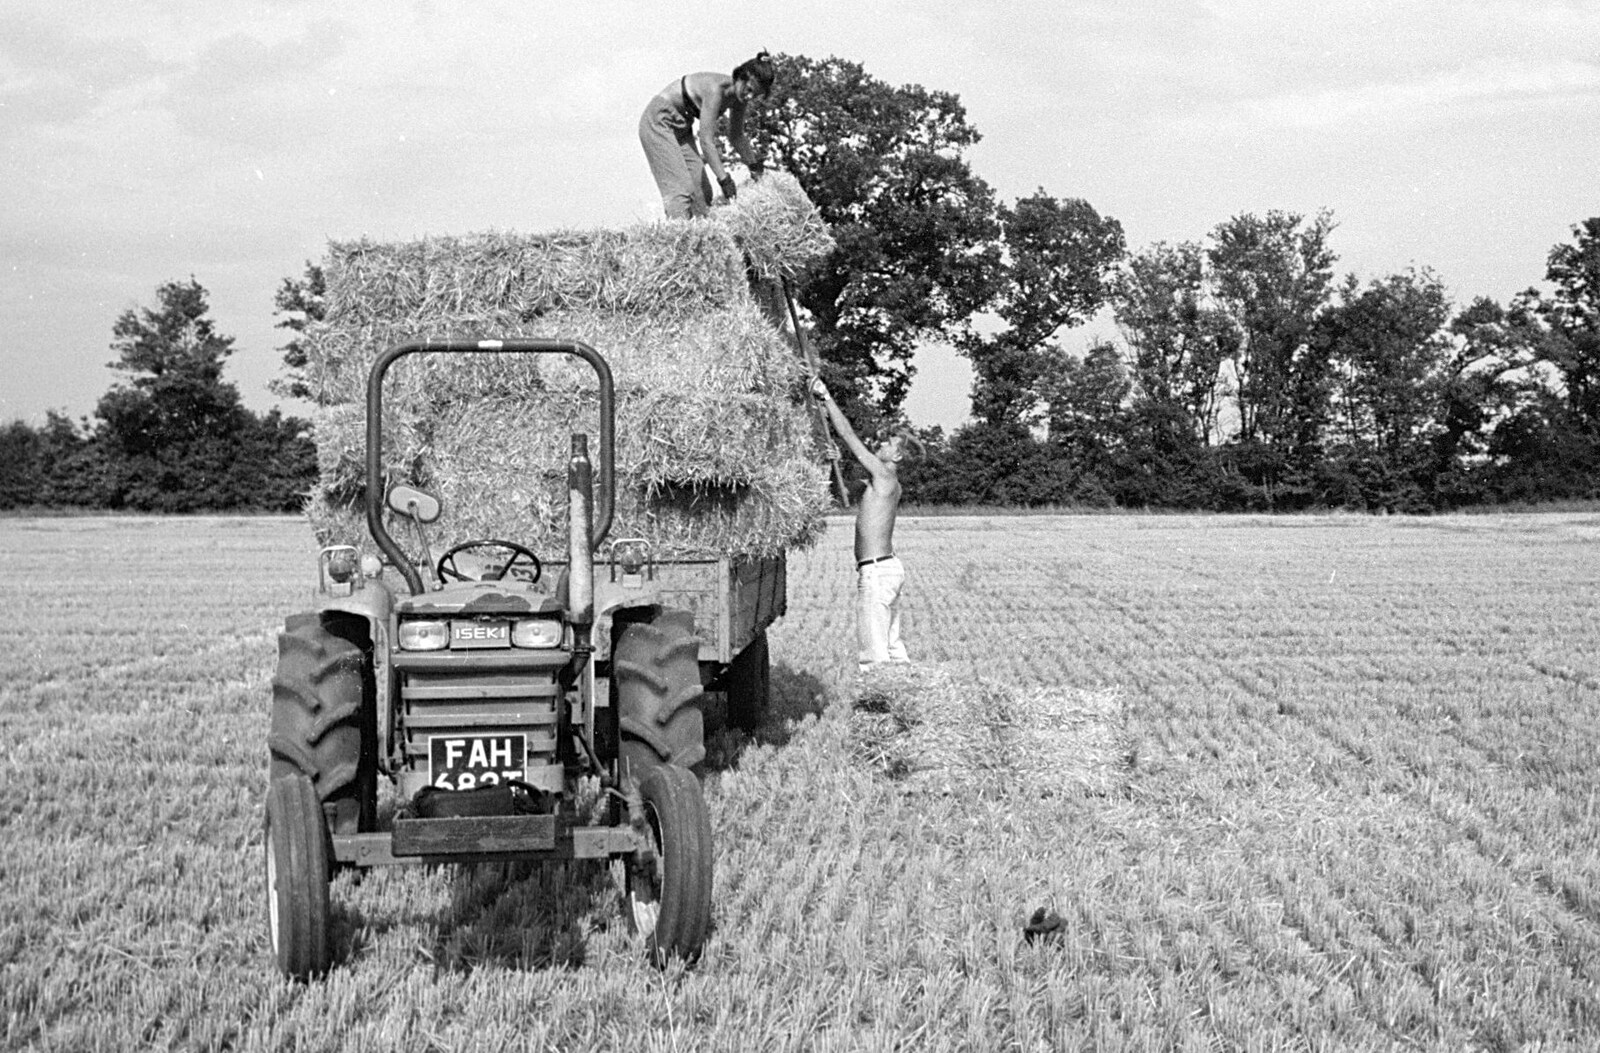 Nosher pitches a bale up to Sarah from Working on the Harvest, Tibenham, Norfolk - 11th August 1992